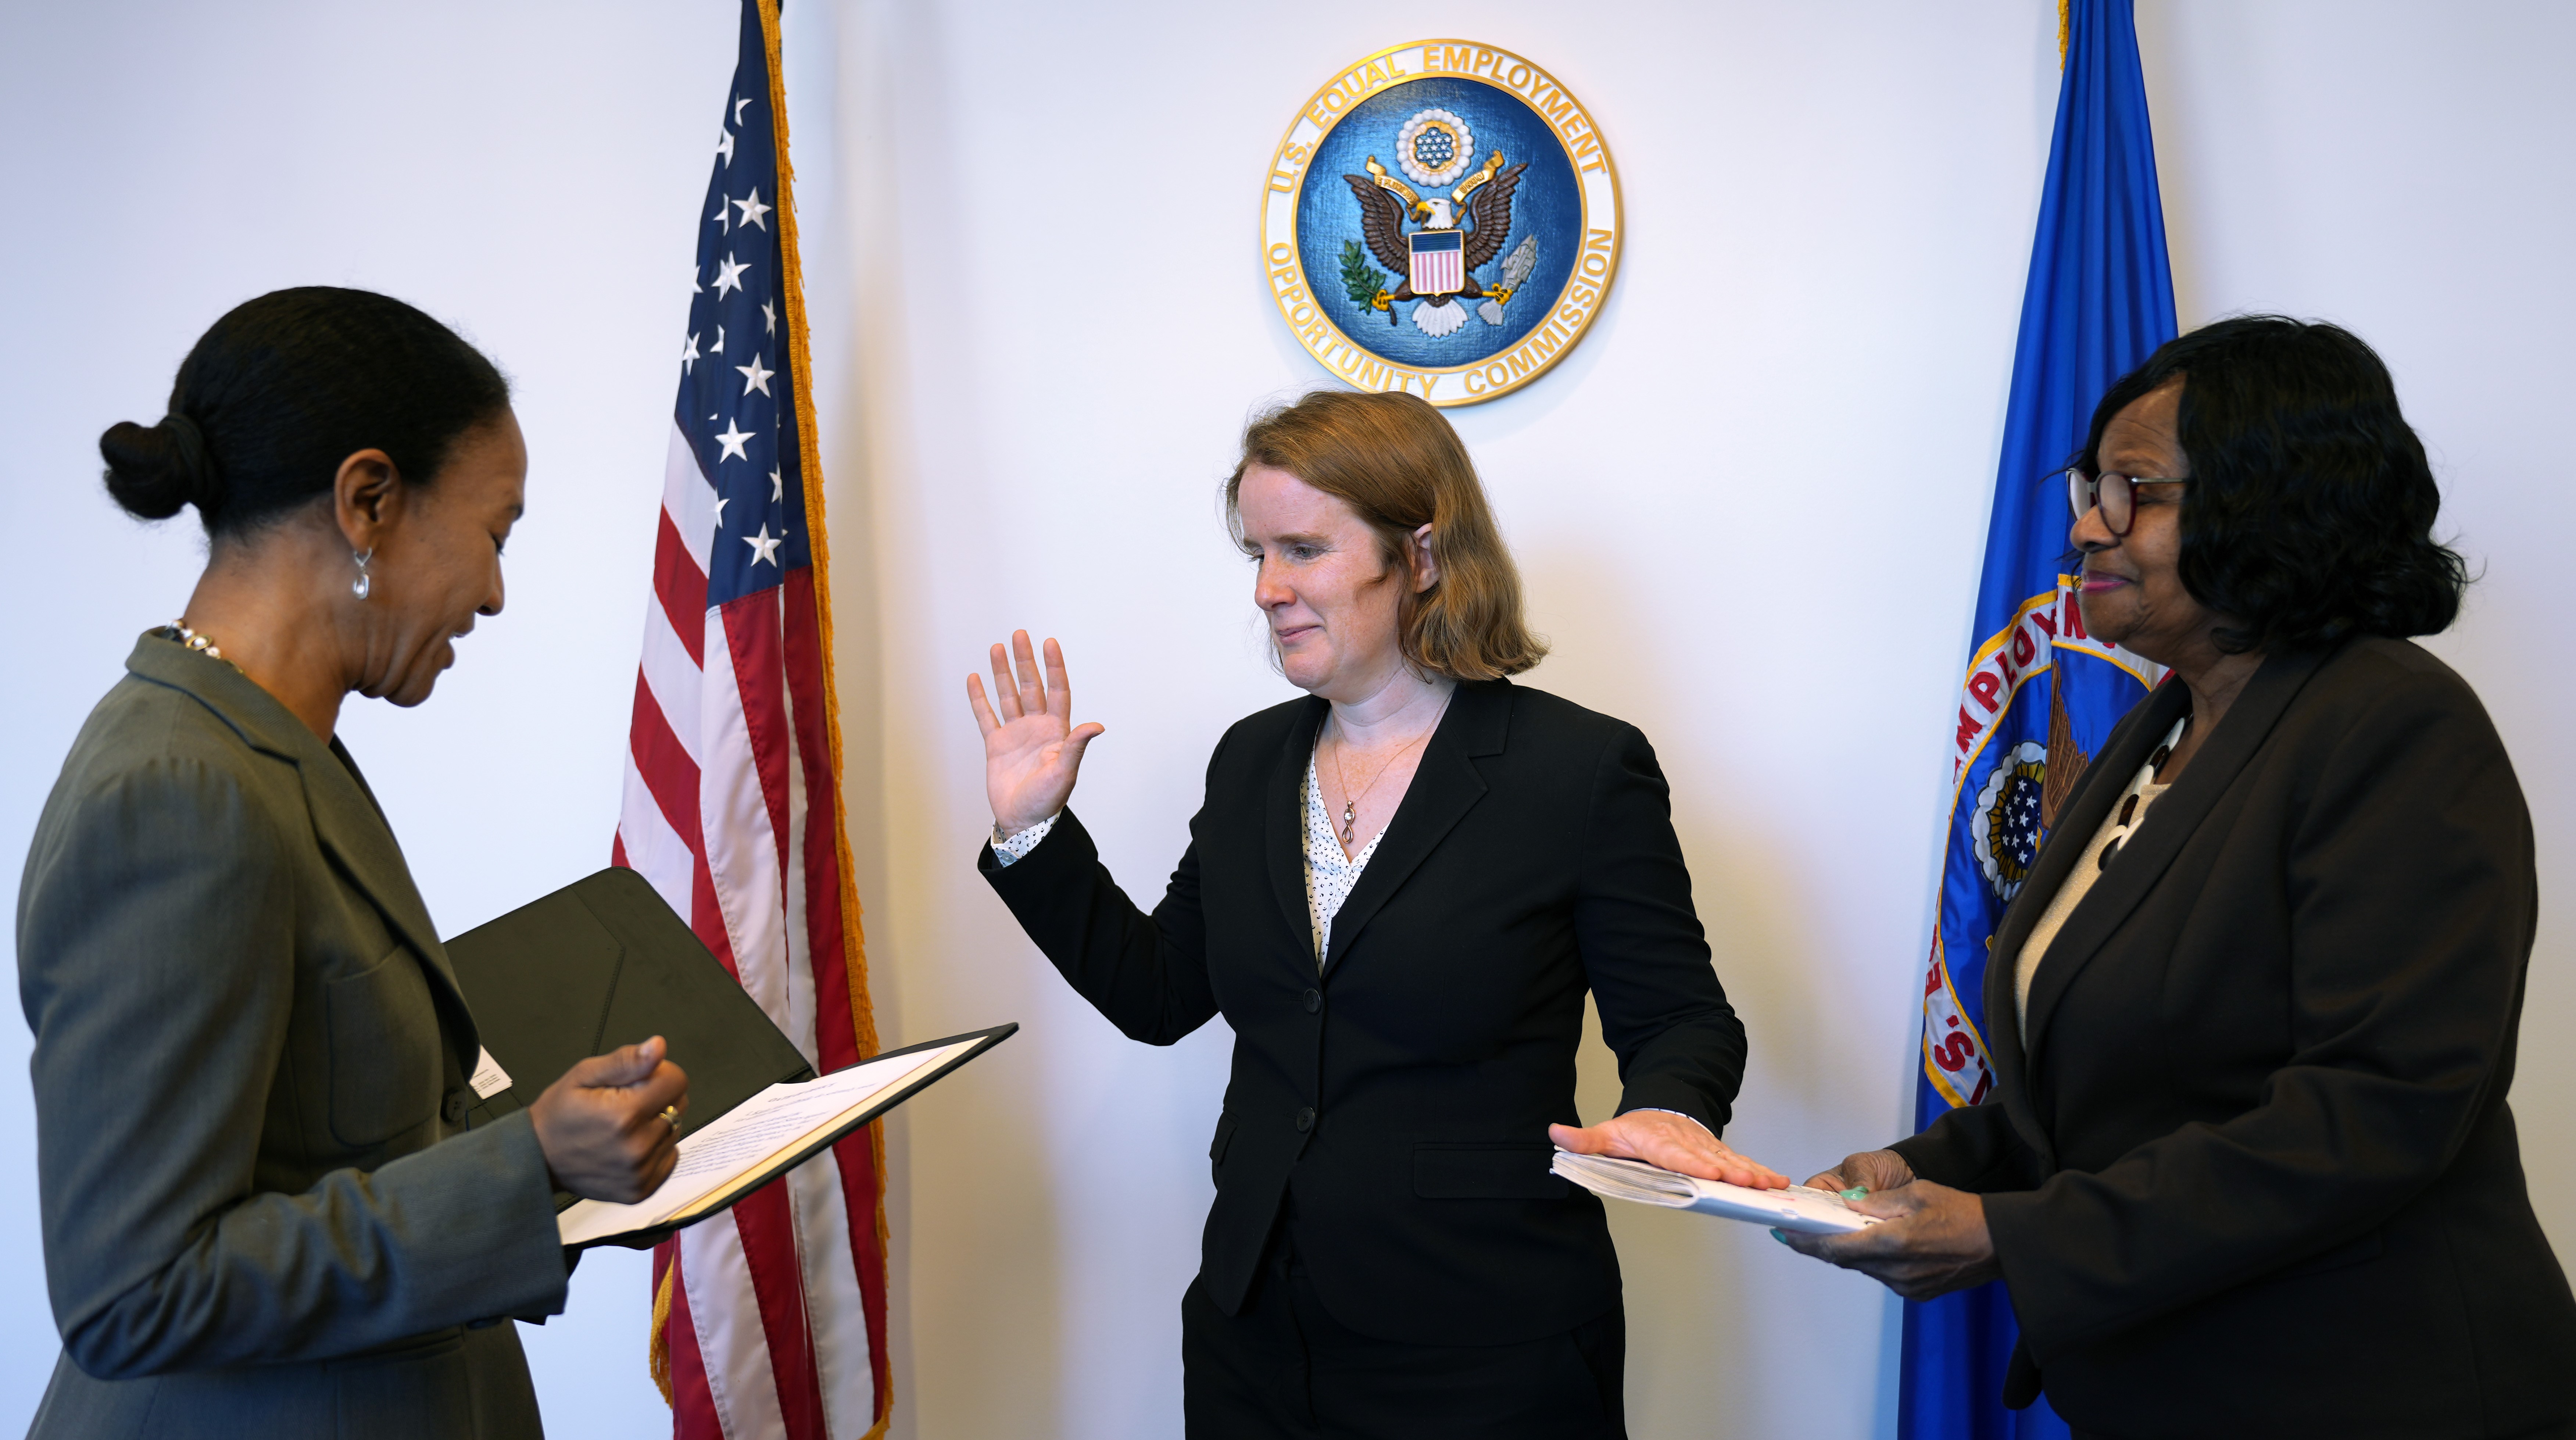 EEOC Chair Charlotte A. Burrows administers the oath of office to the agency’s new General Counsel Karla Gilbride Oct. 23, with Gwendolyn Young Reams attending